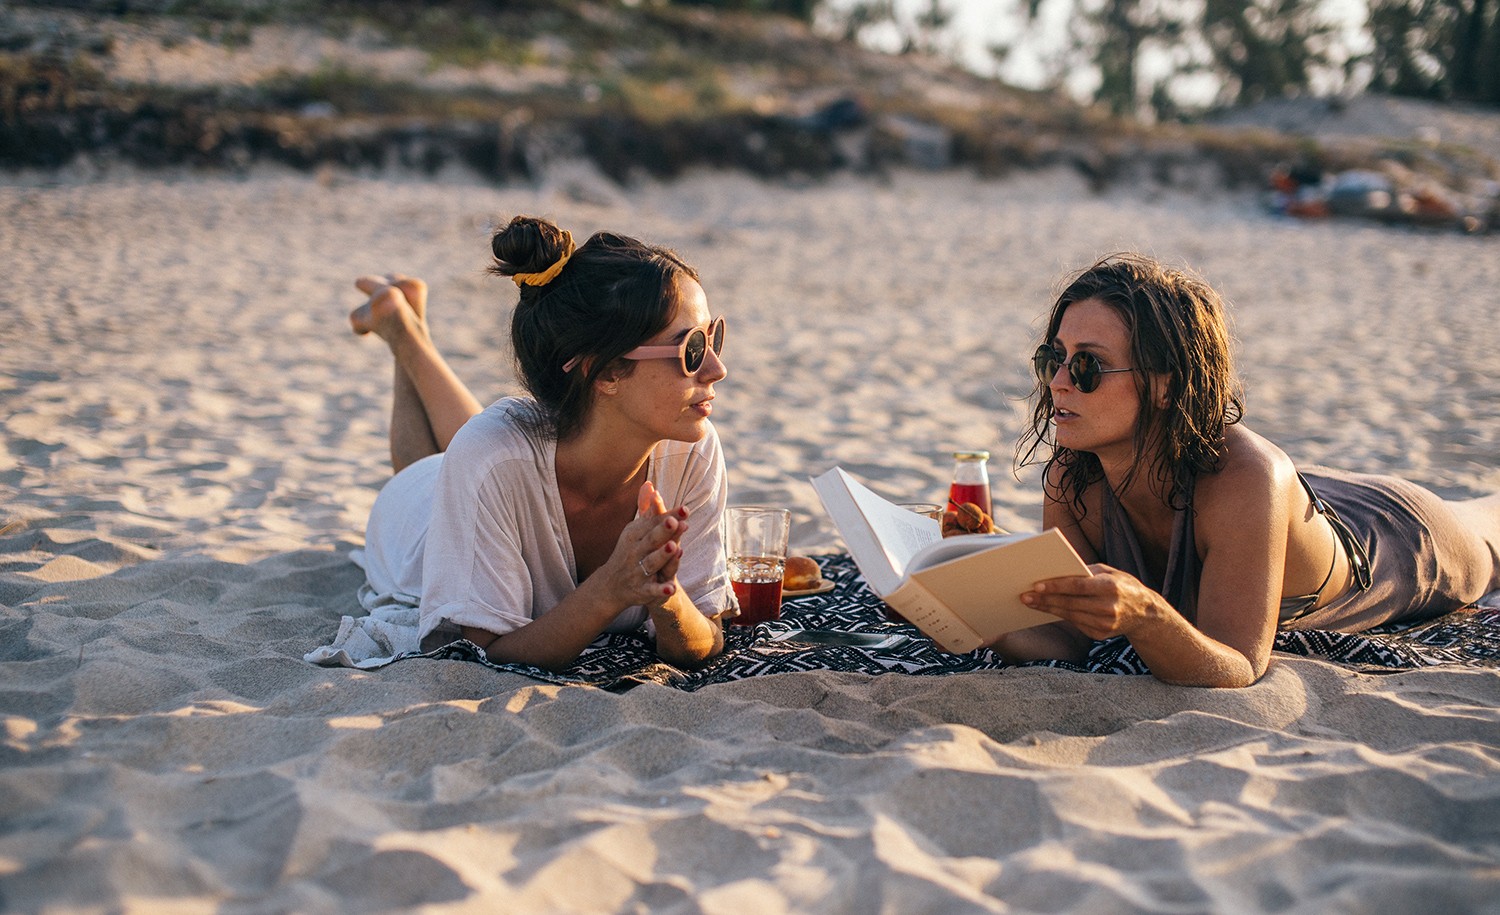 Two introverts talk on the beach